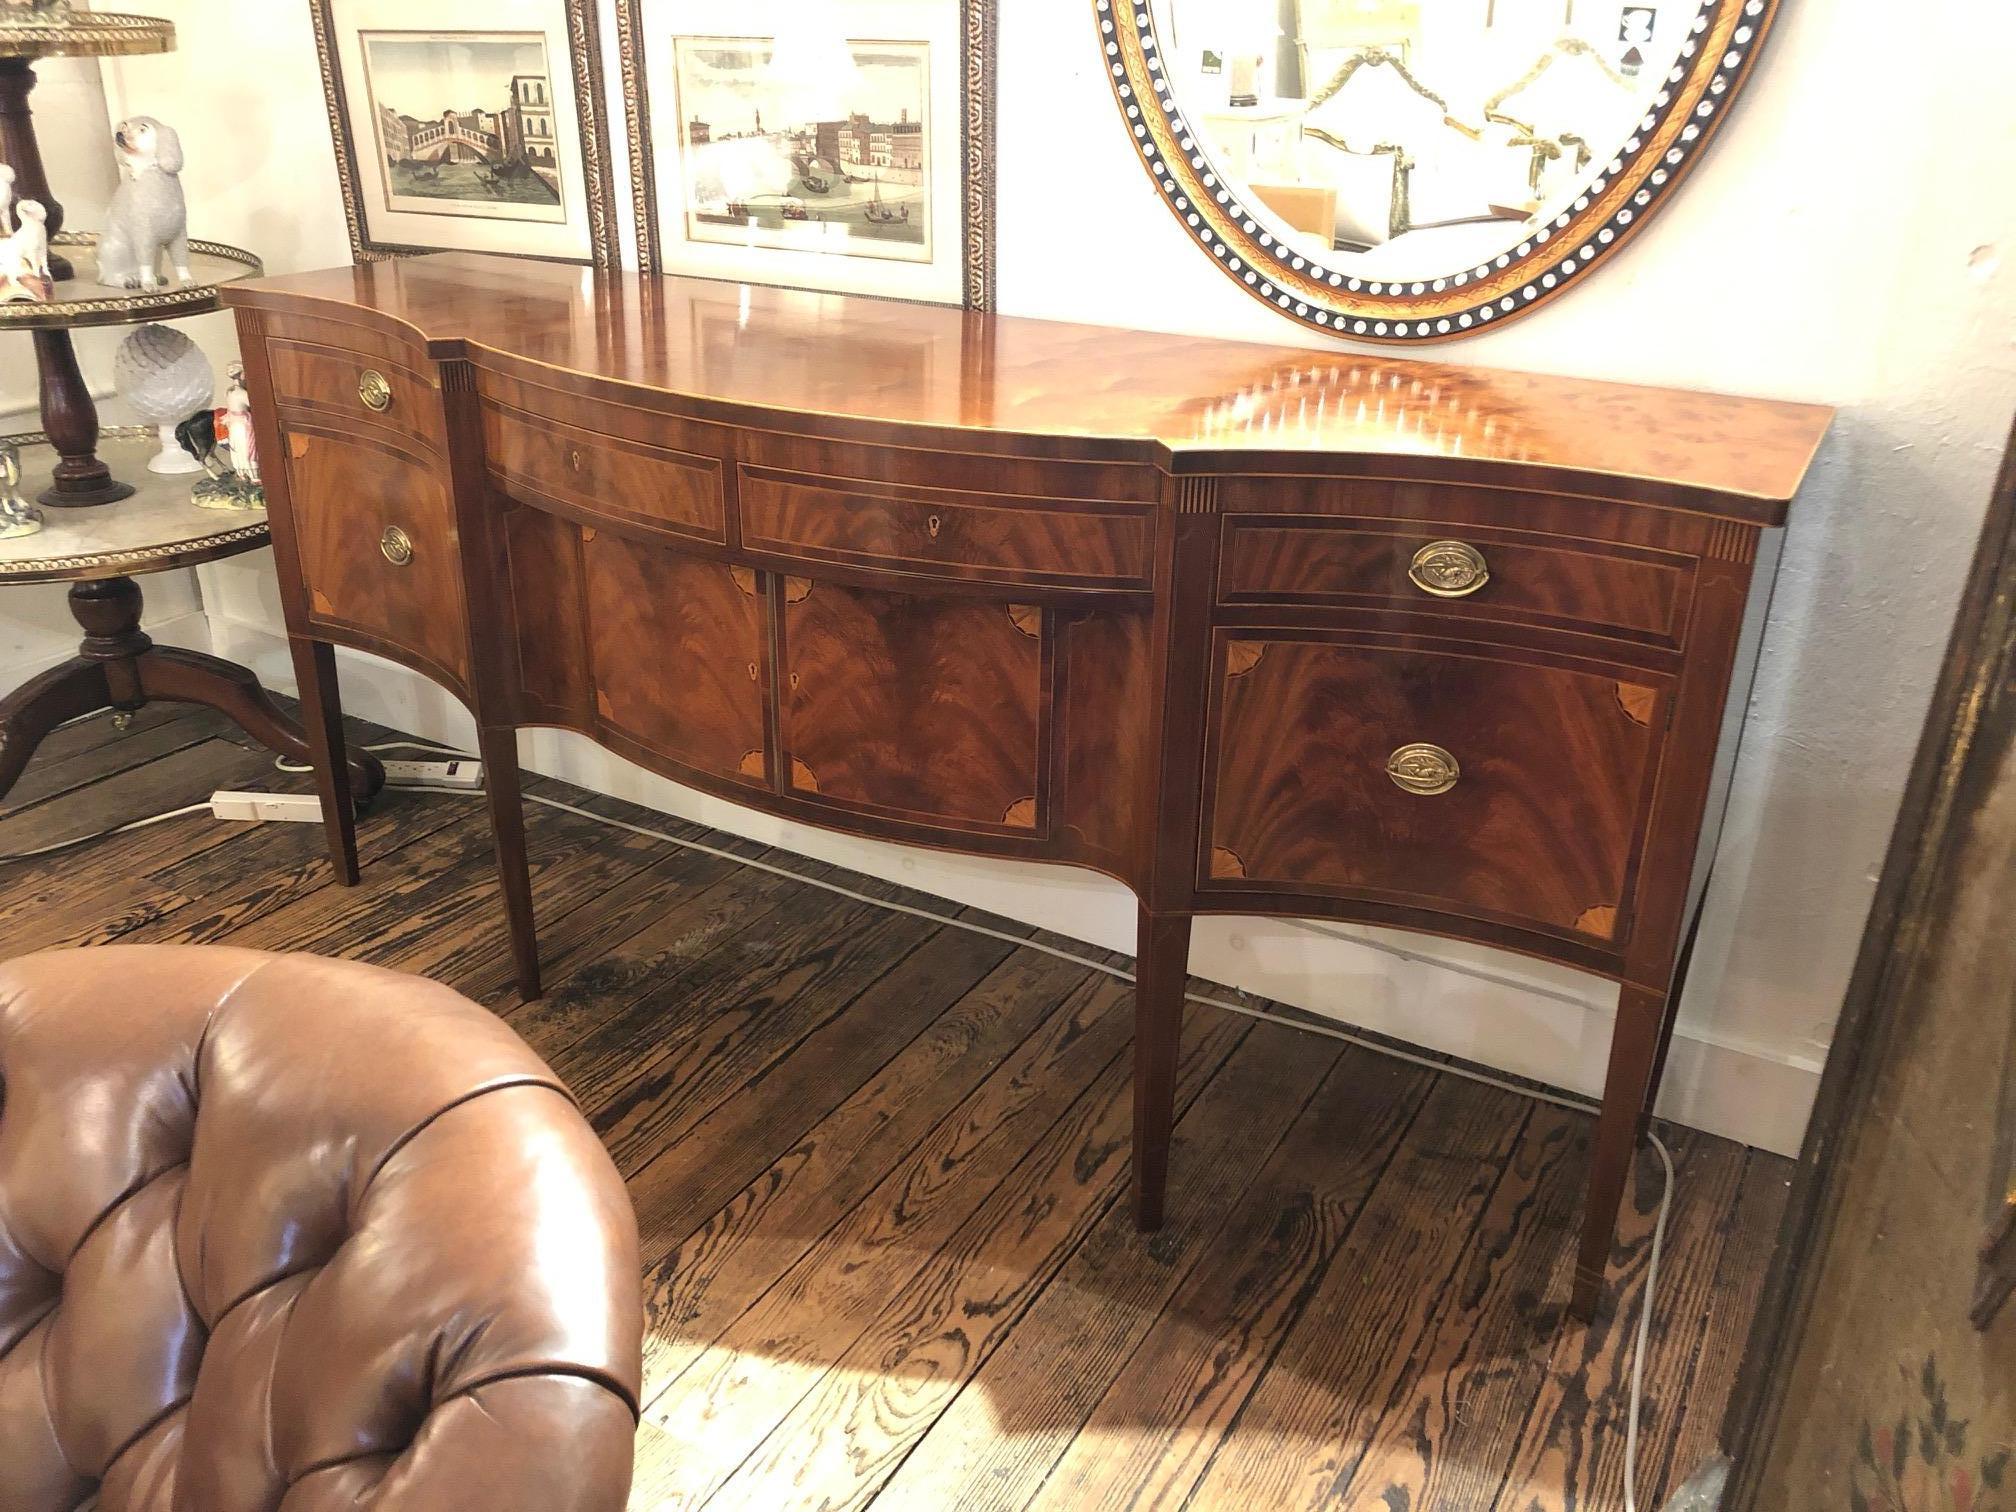 A beautifully crafted mahogany sideboard having stunning mahogany veneers and decorative inlay, carefully crafted fluted legs, solid brass hardware, English dovetail joinery, and solid wood construction. There are 4 drawers along the top, 4 lovely